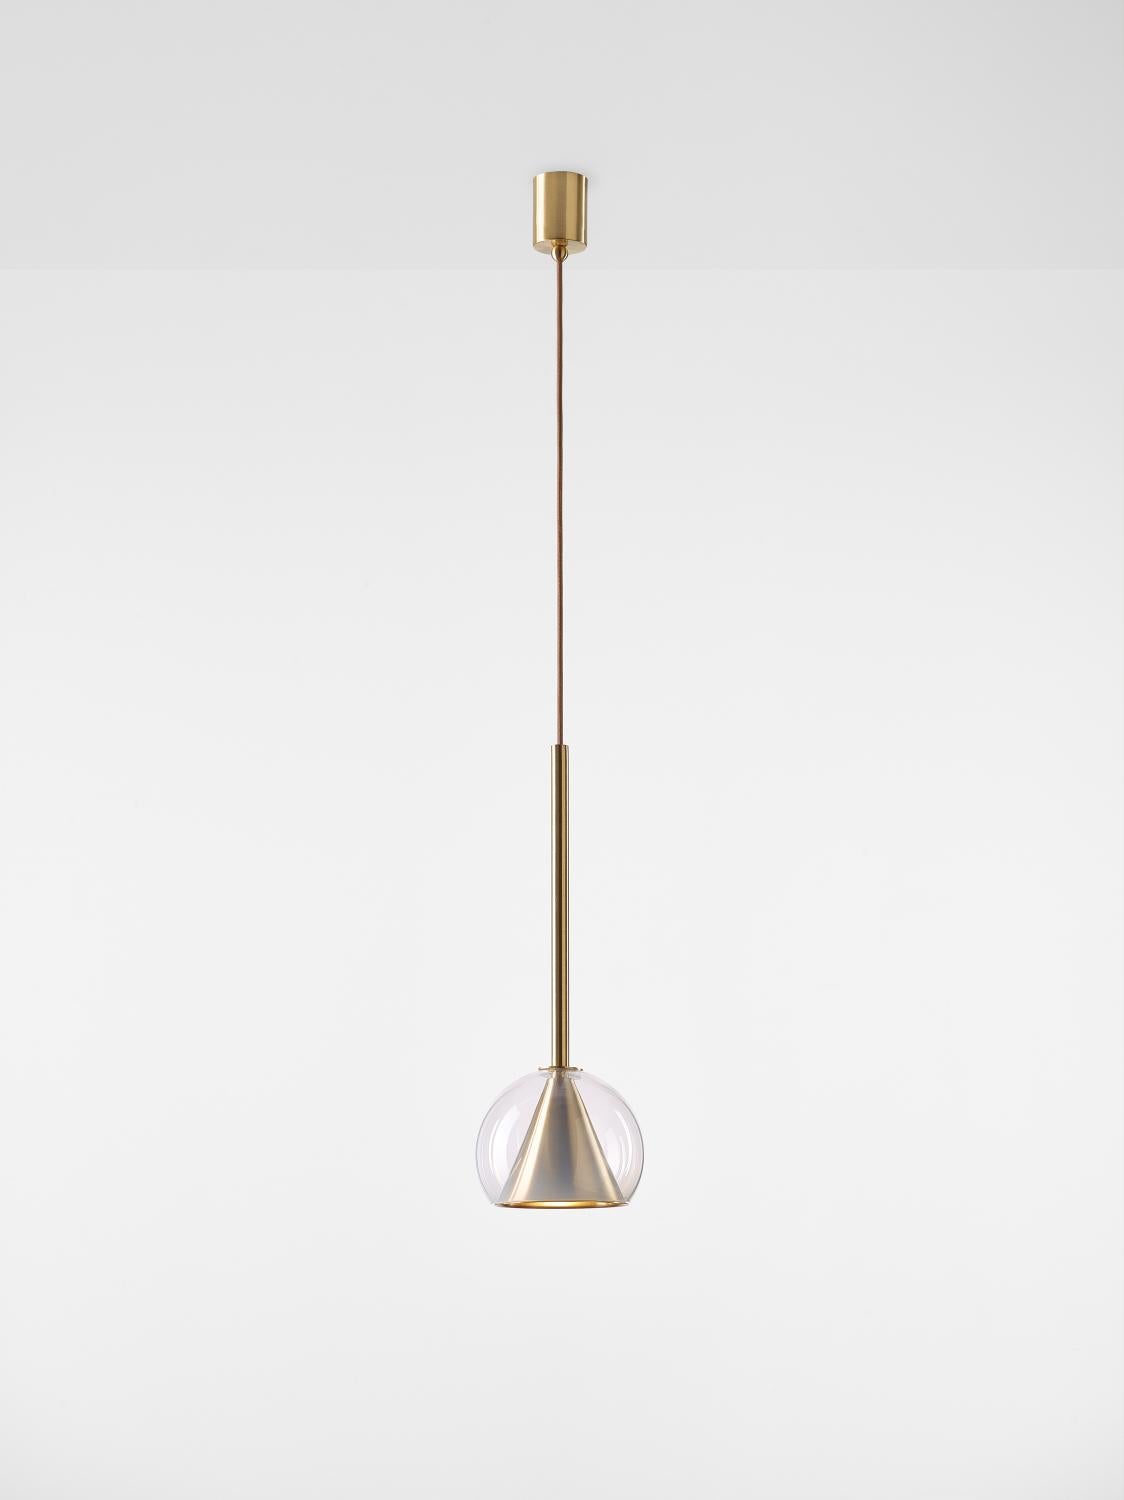 Set of 2 small alabaster white kono pendant lights by Dechem Studio
Dimensions: D 19 x H 52 cm
Materials: brass, glass.
Also available: different finishes and colours available,

This collection of suspended light fixtures combines the